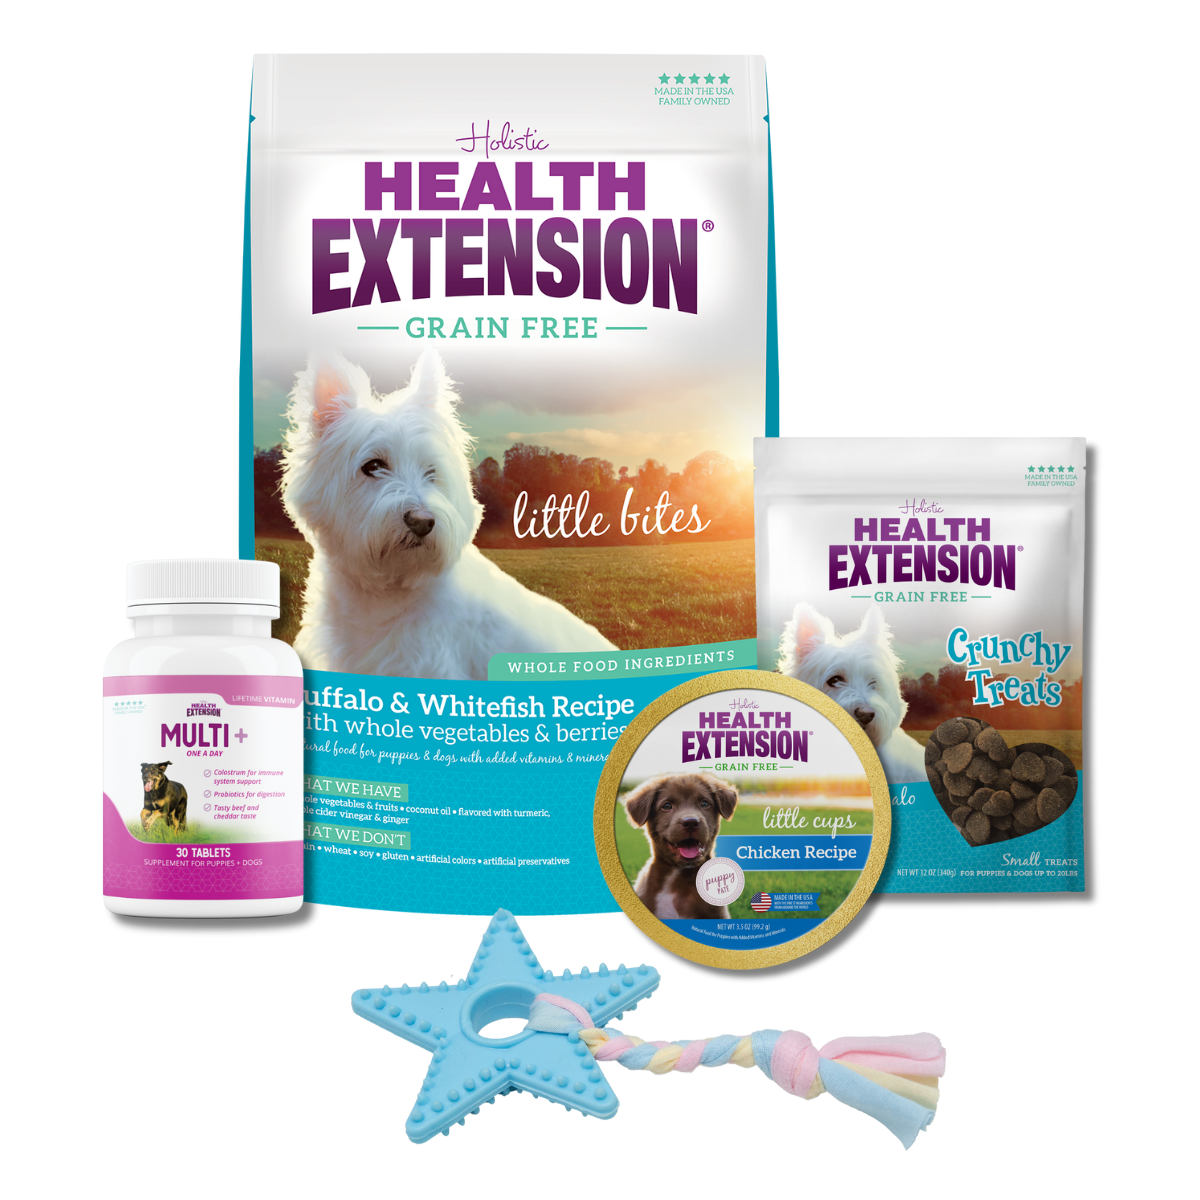 Complete Puppy Bundle: Bag of Health Extension Grain Free Buffalo & Whitefish Little Bites and variety of other dog products, including food, treats, toys, and supplements.